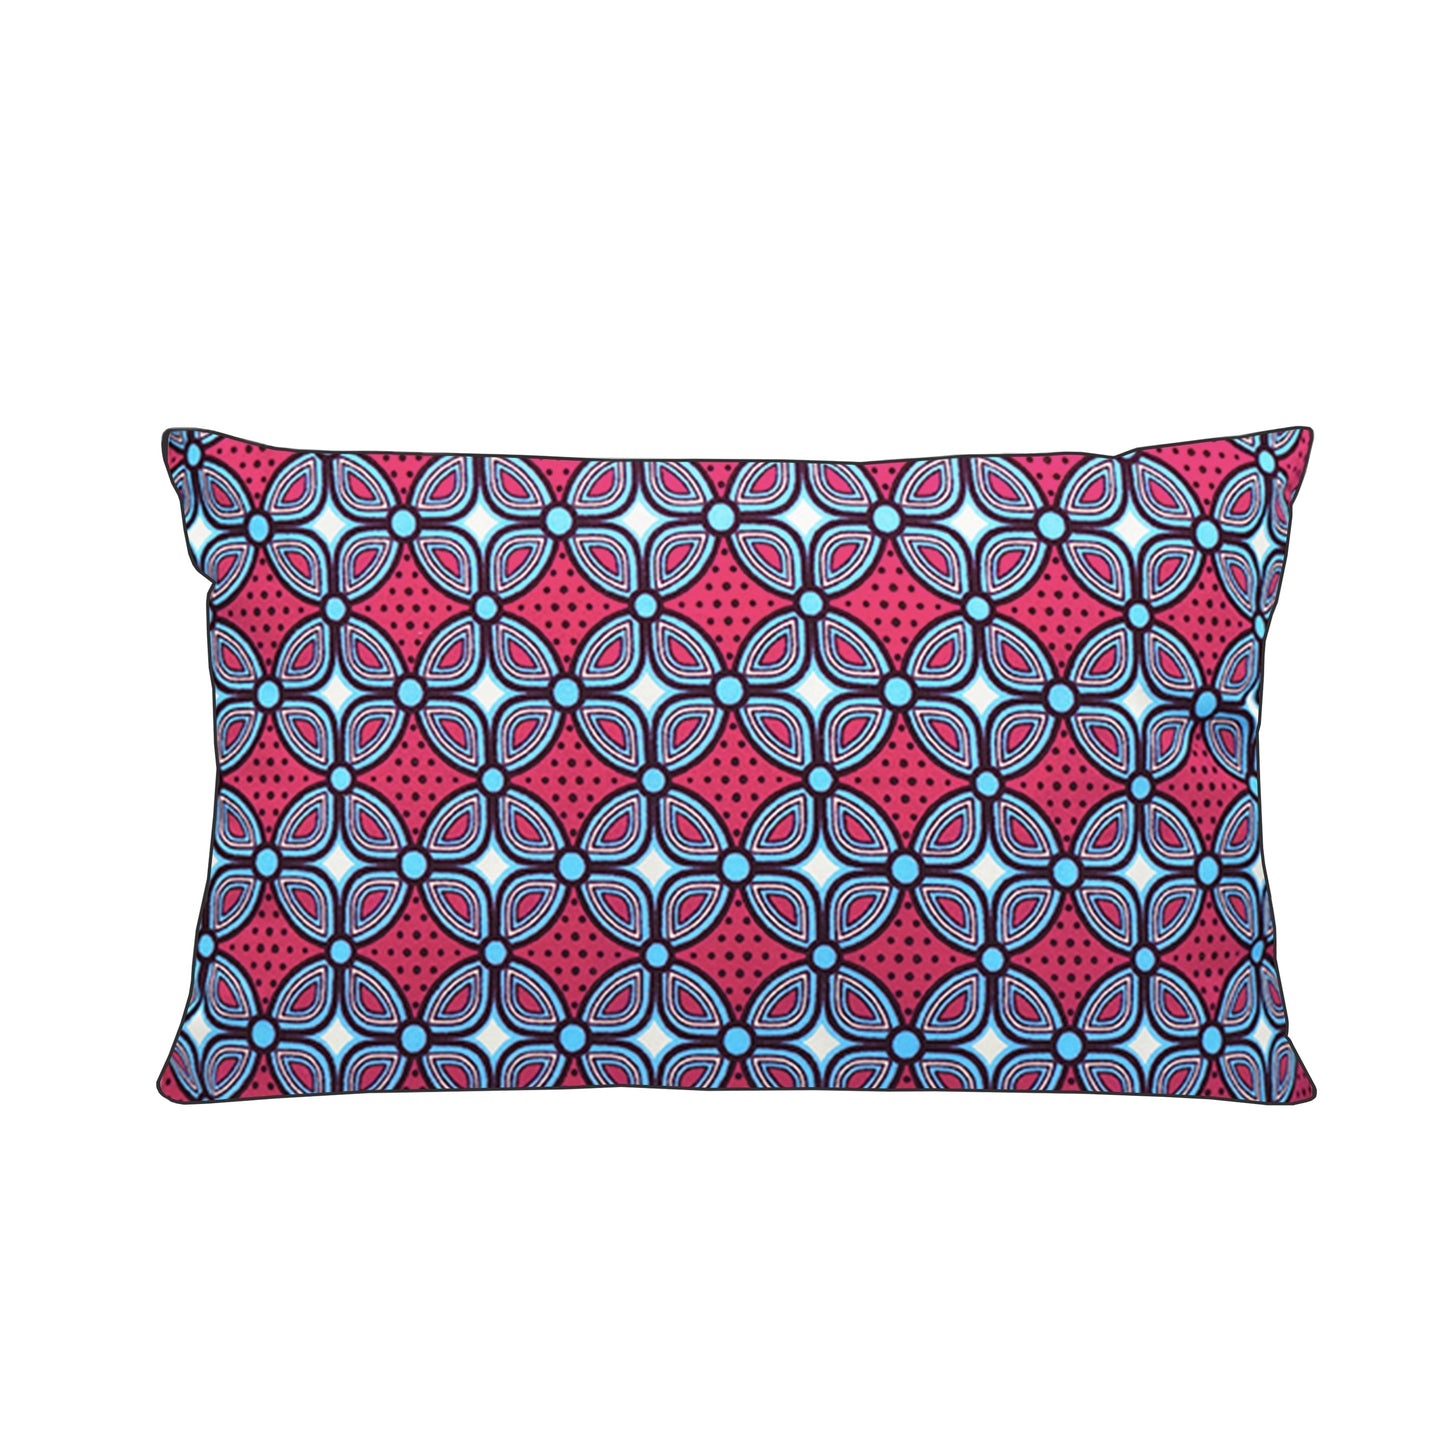 Kowie Cushion Cover